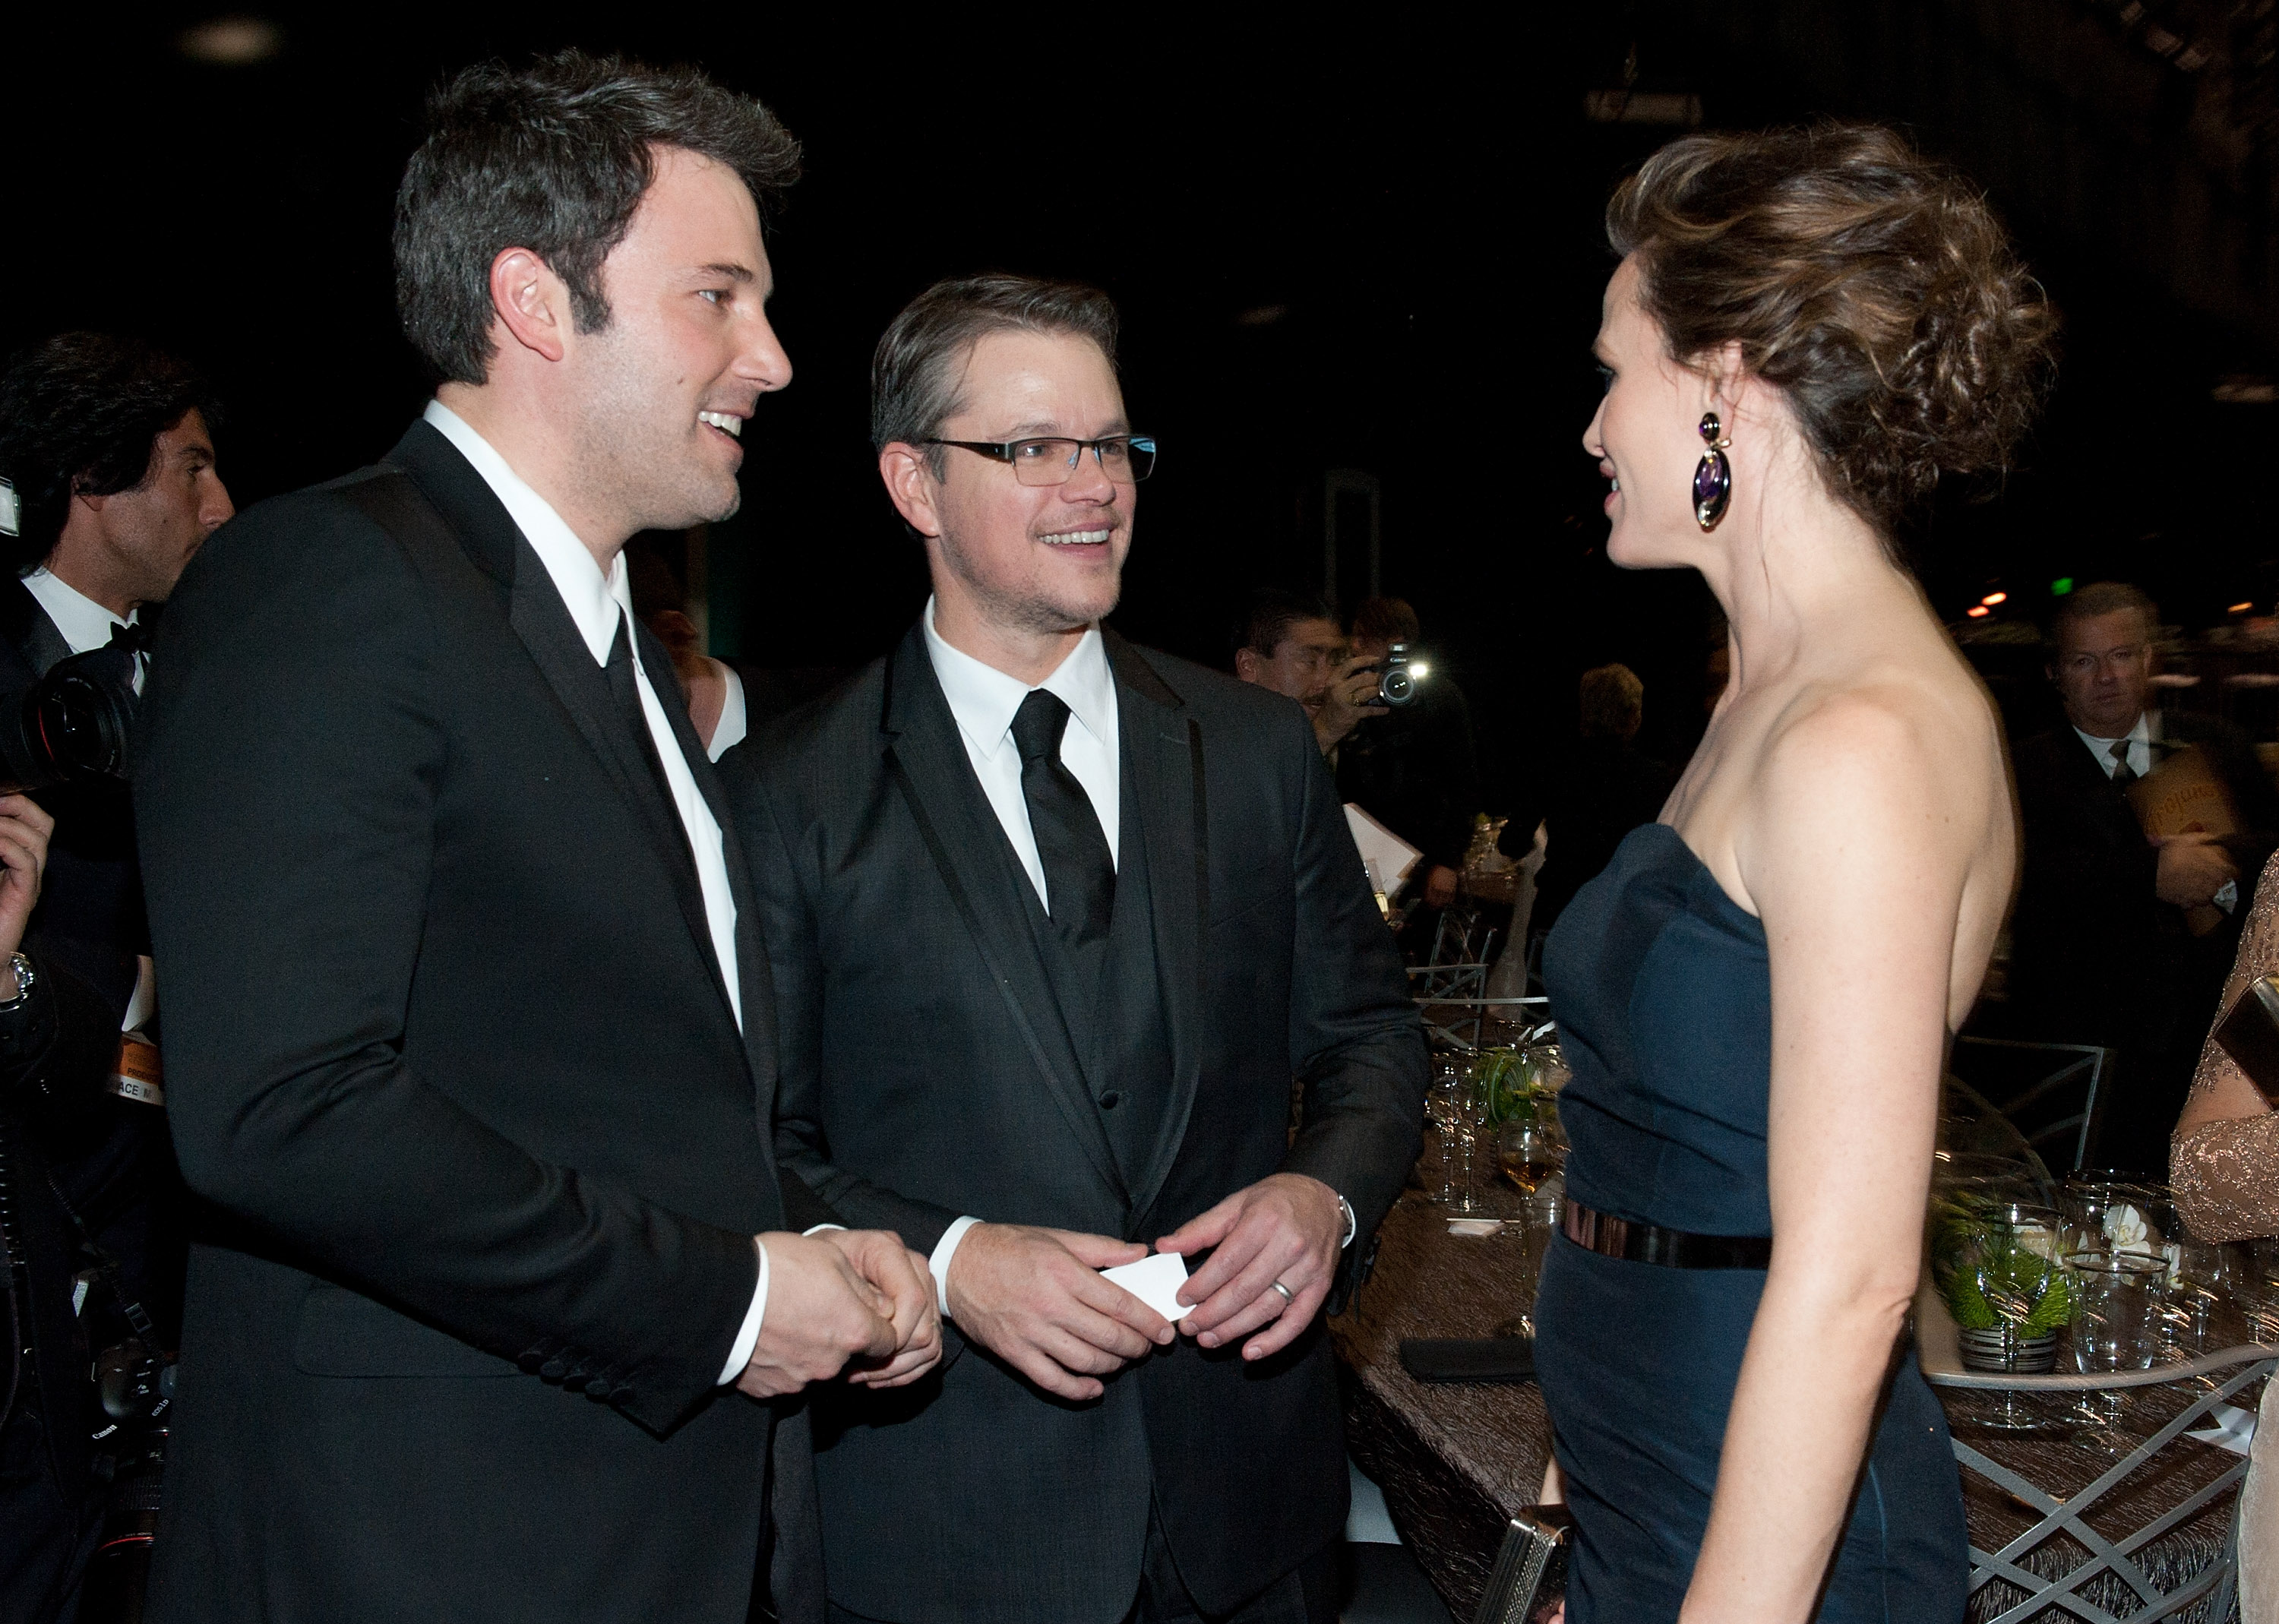 Ben Affleck, Matt Damon, and Jennifer Garner at the 20th Annual Screen Actors Guild Awards in Los Angeles, California on January 18, 2014 | Source: Getty Images